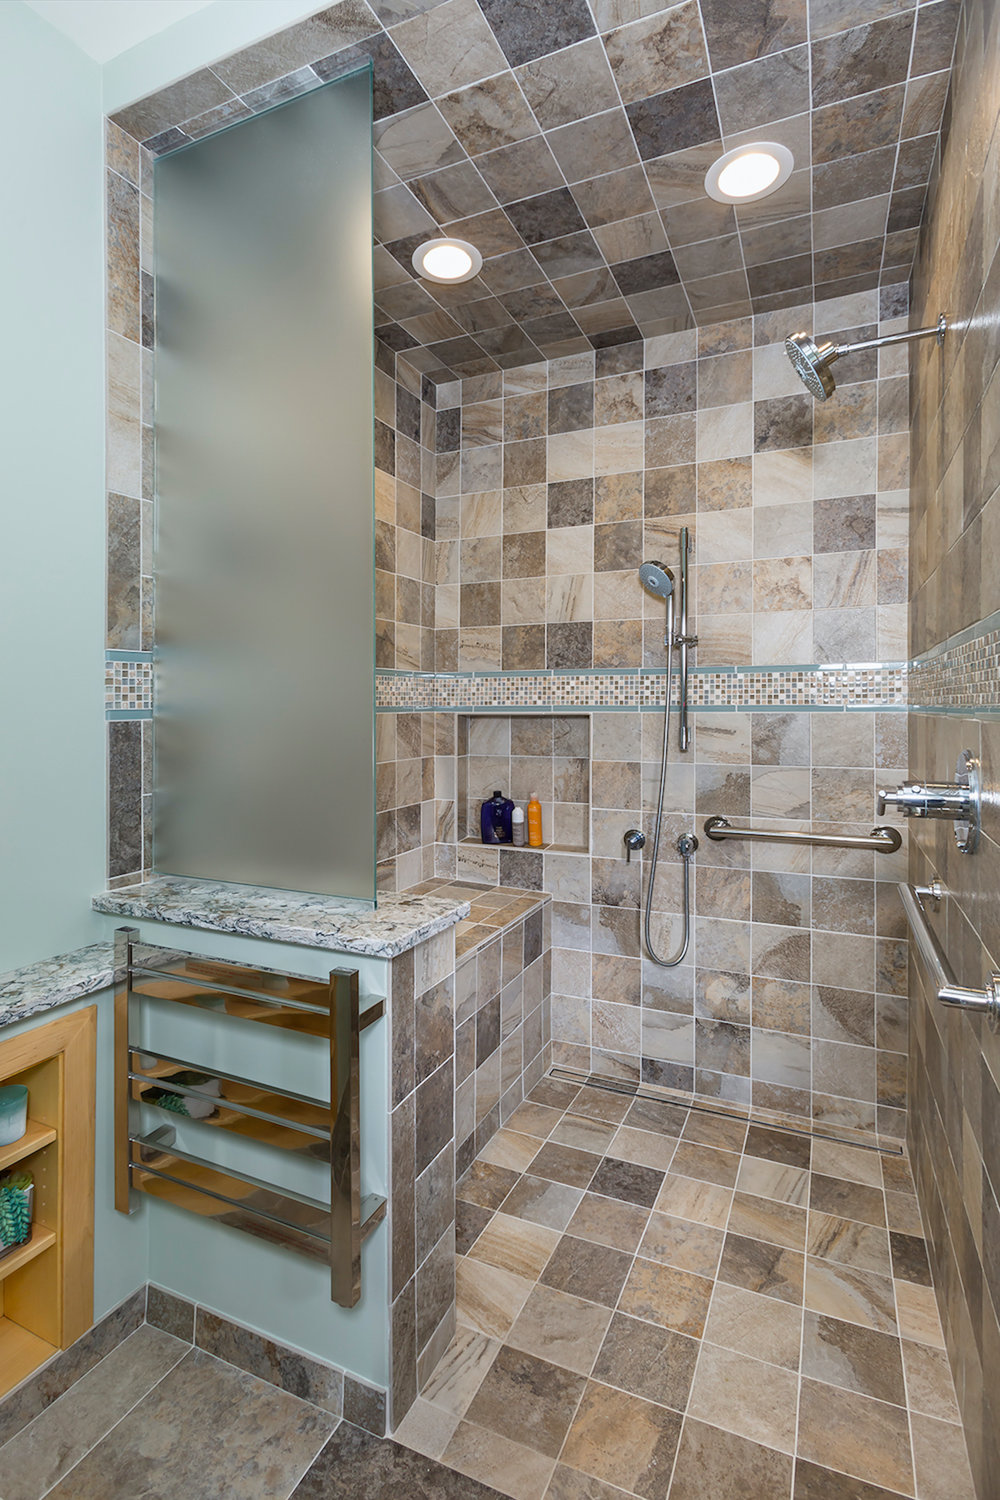 This bathroom by Sylvestre Remodeling & Design features a shower without a curb as it aids in mobility. Dangerous throw rugs have been removed.